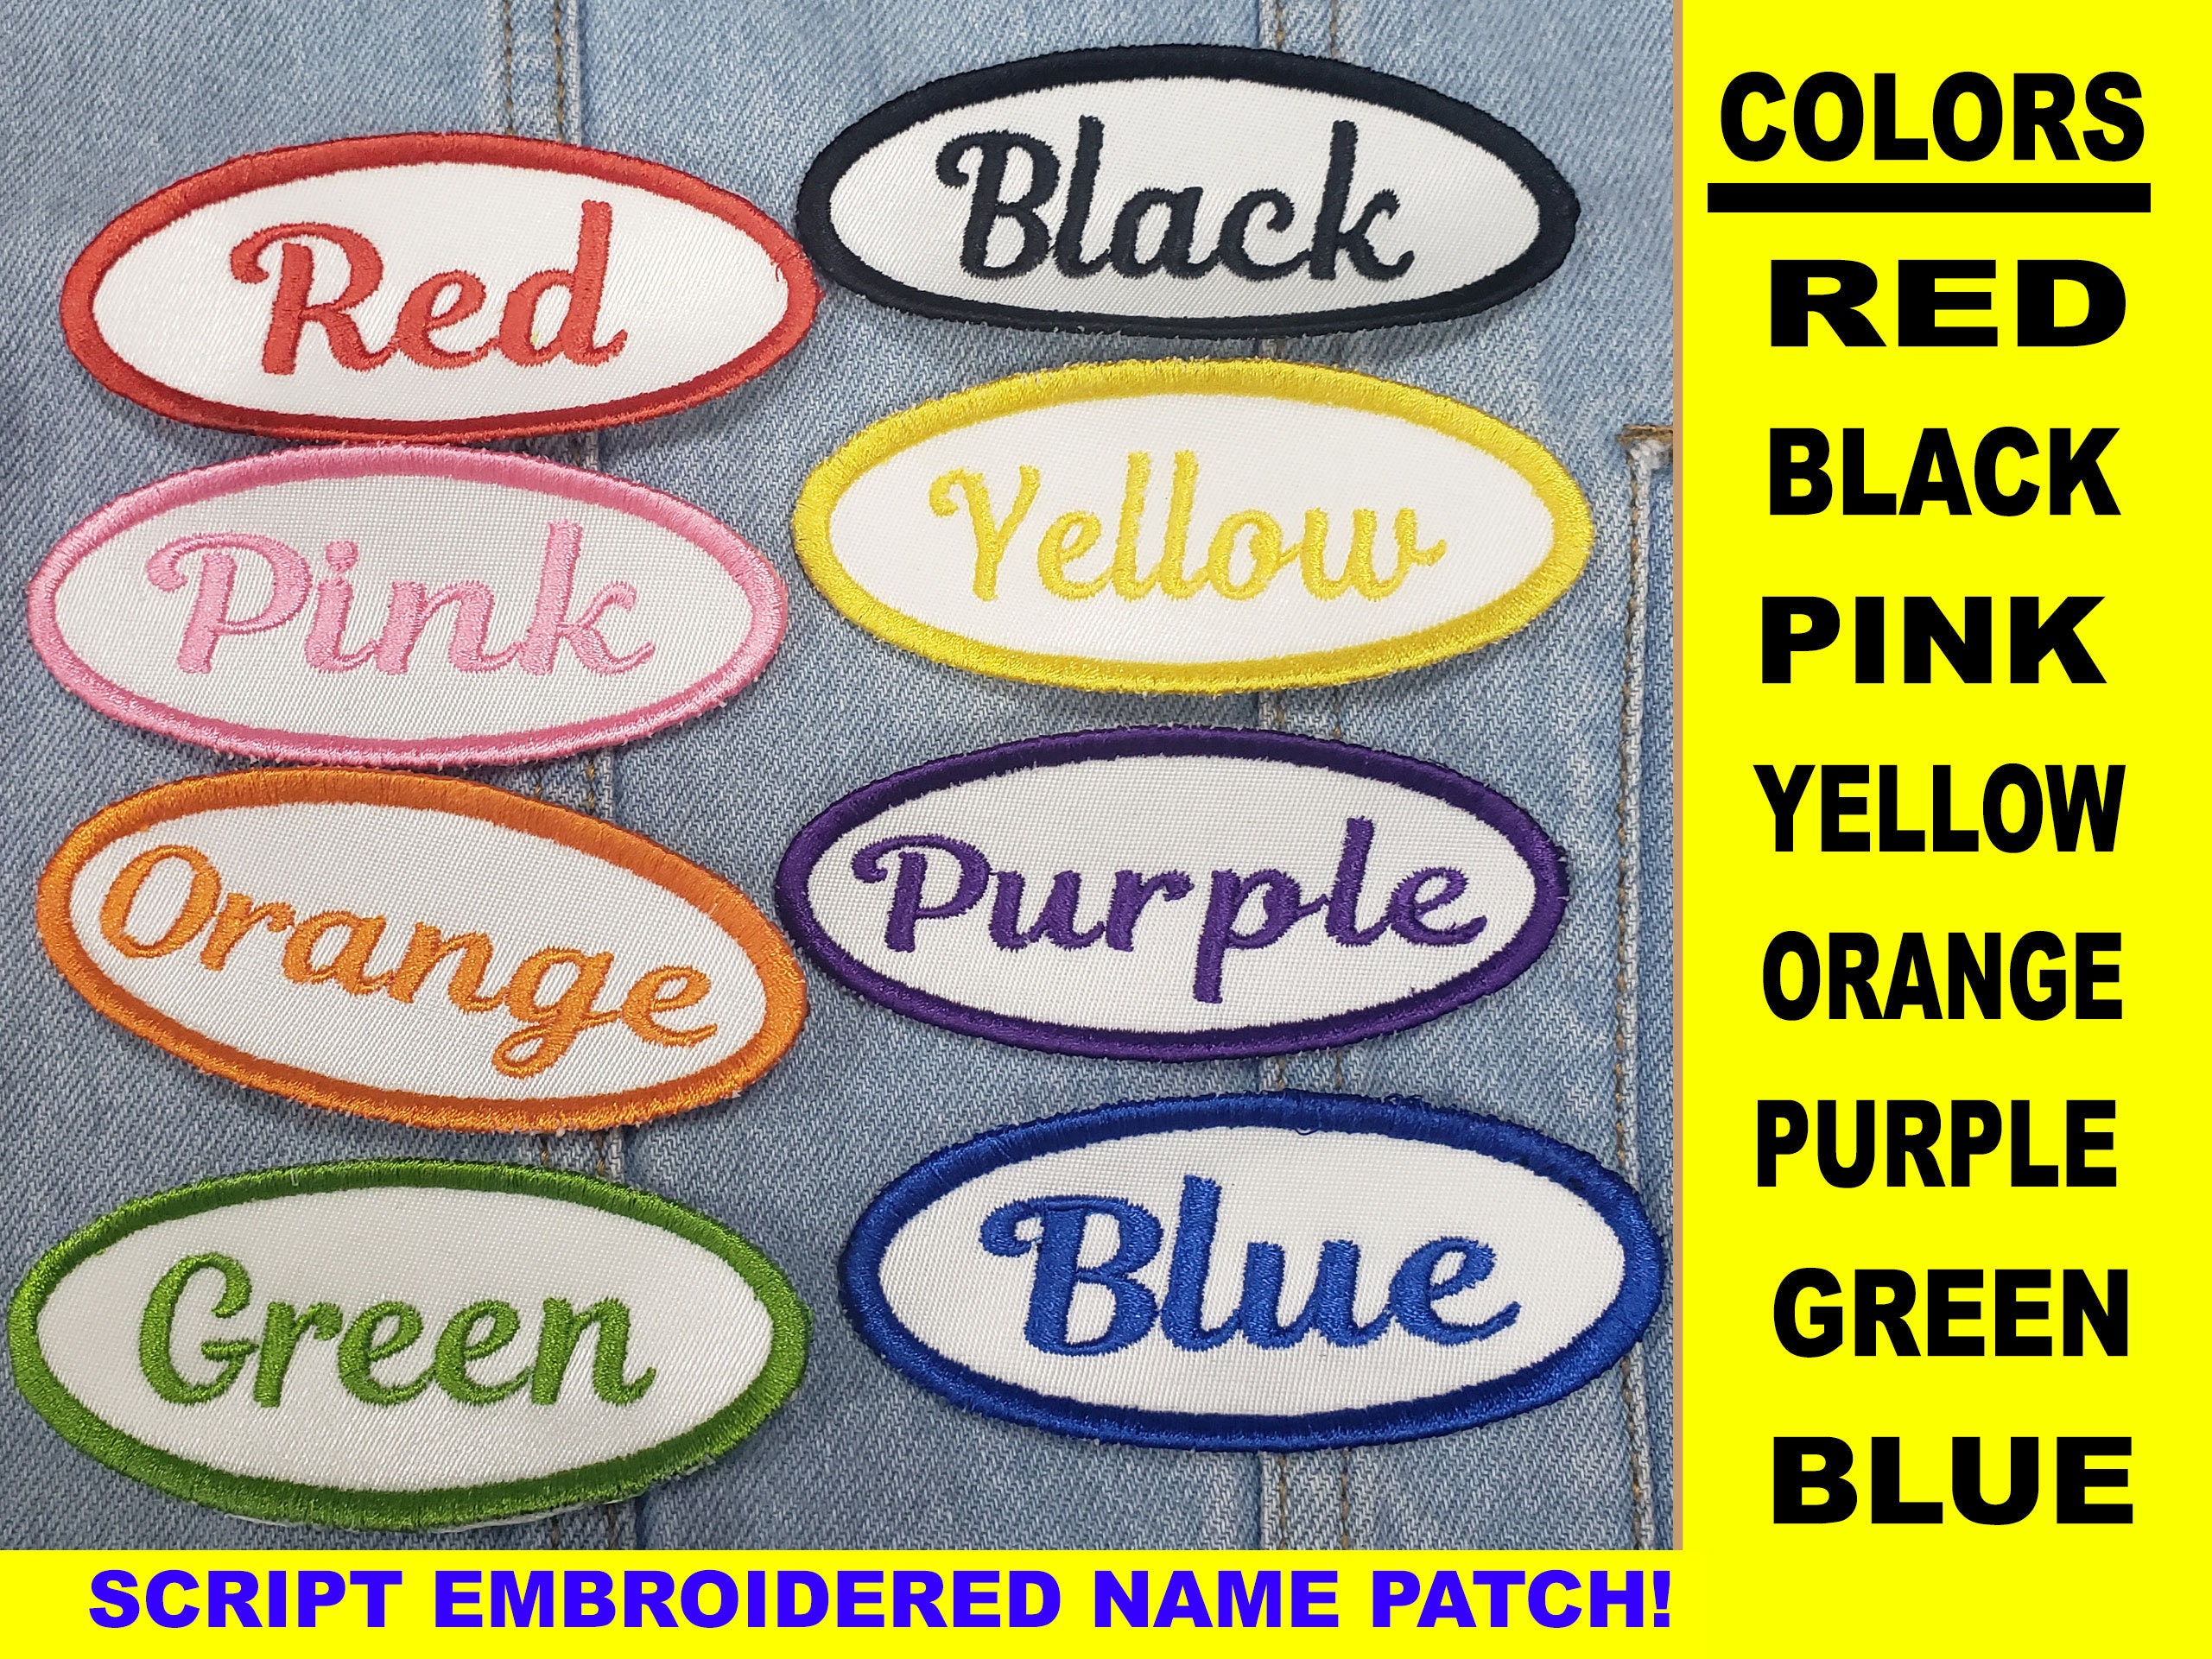 Your Logo, Printed Patch, Custom Embroidered Patch, the Dye Printing Fabric  Patches 